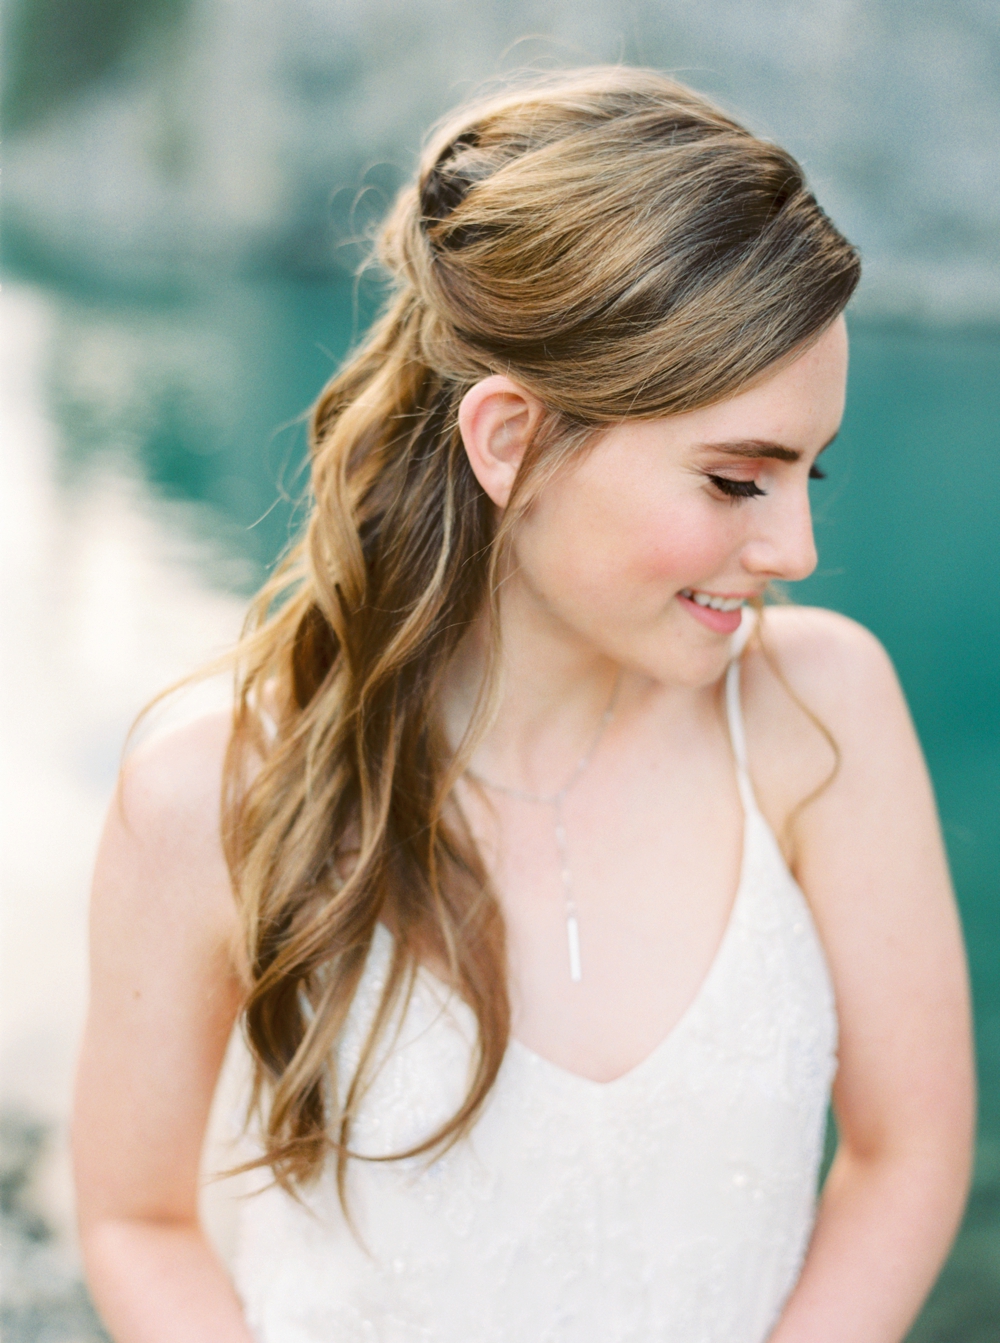 Canmore Wedding Photographers | Calgary wedding photography | Naturally Chic Weddings | Willow Flower Co. | The Bridal Boutique | Natural Blues and Greys Editorial Shoot